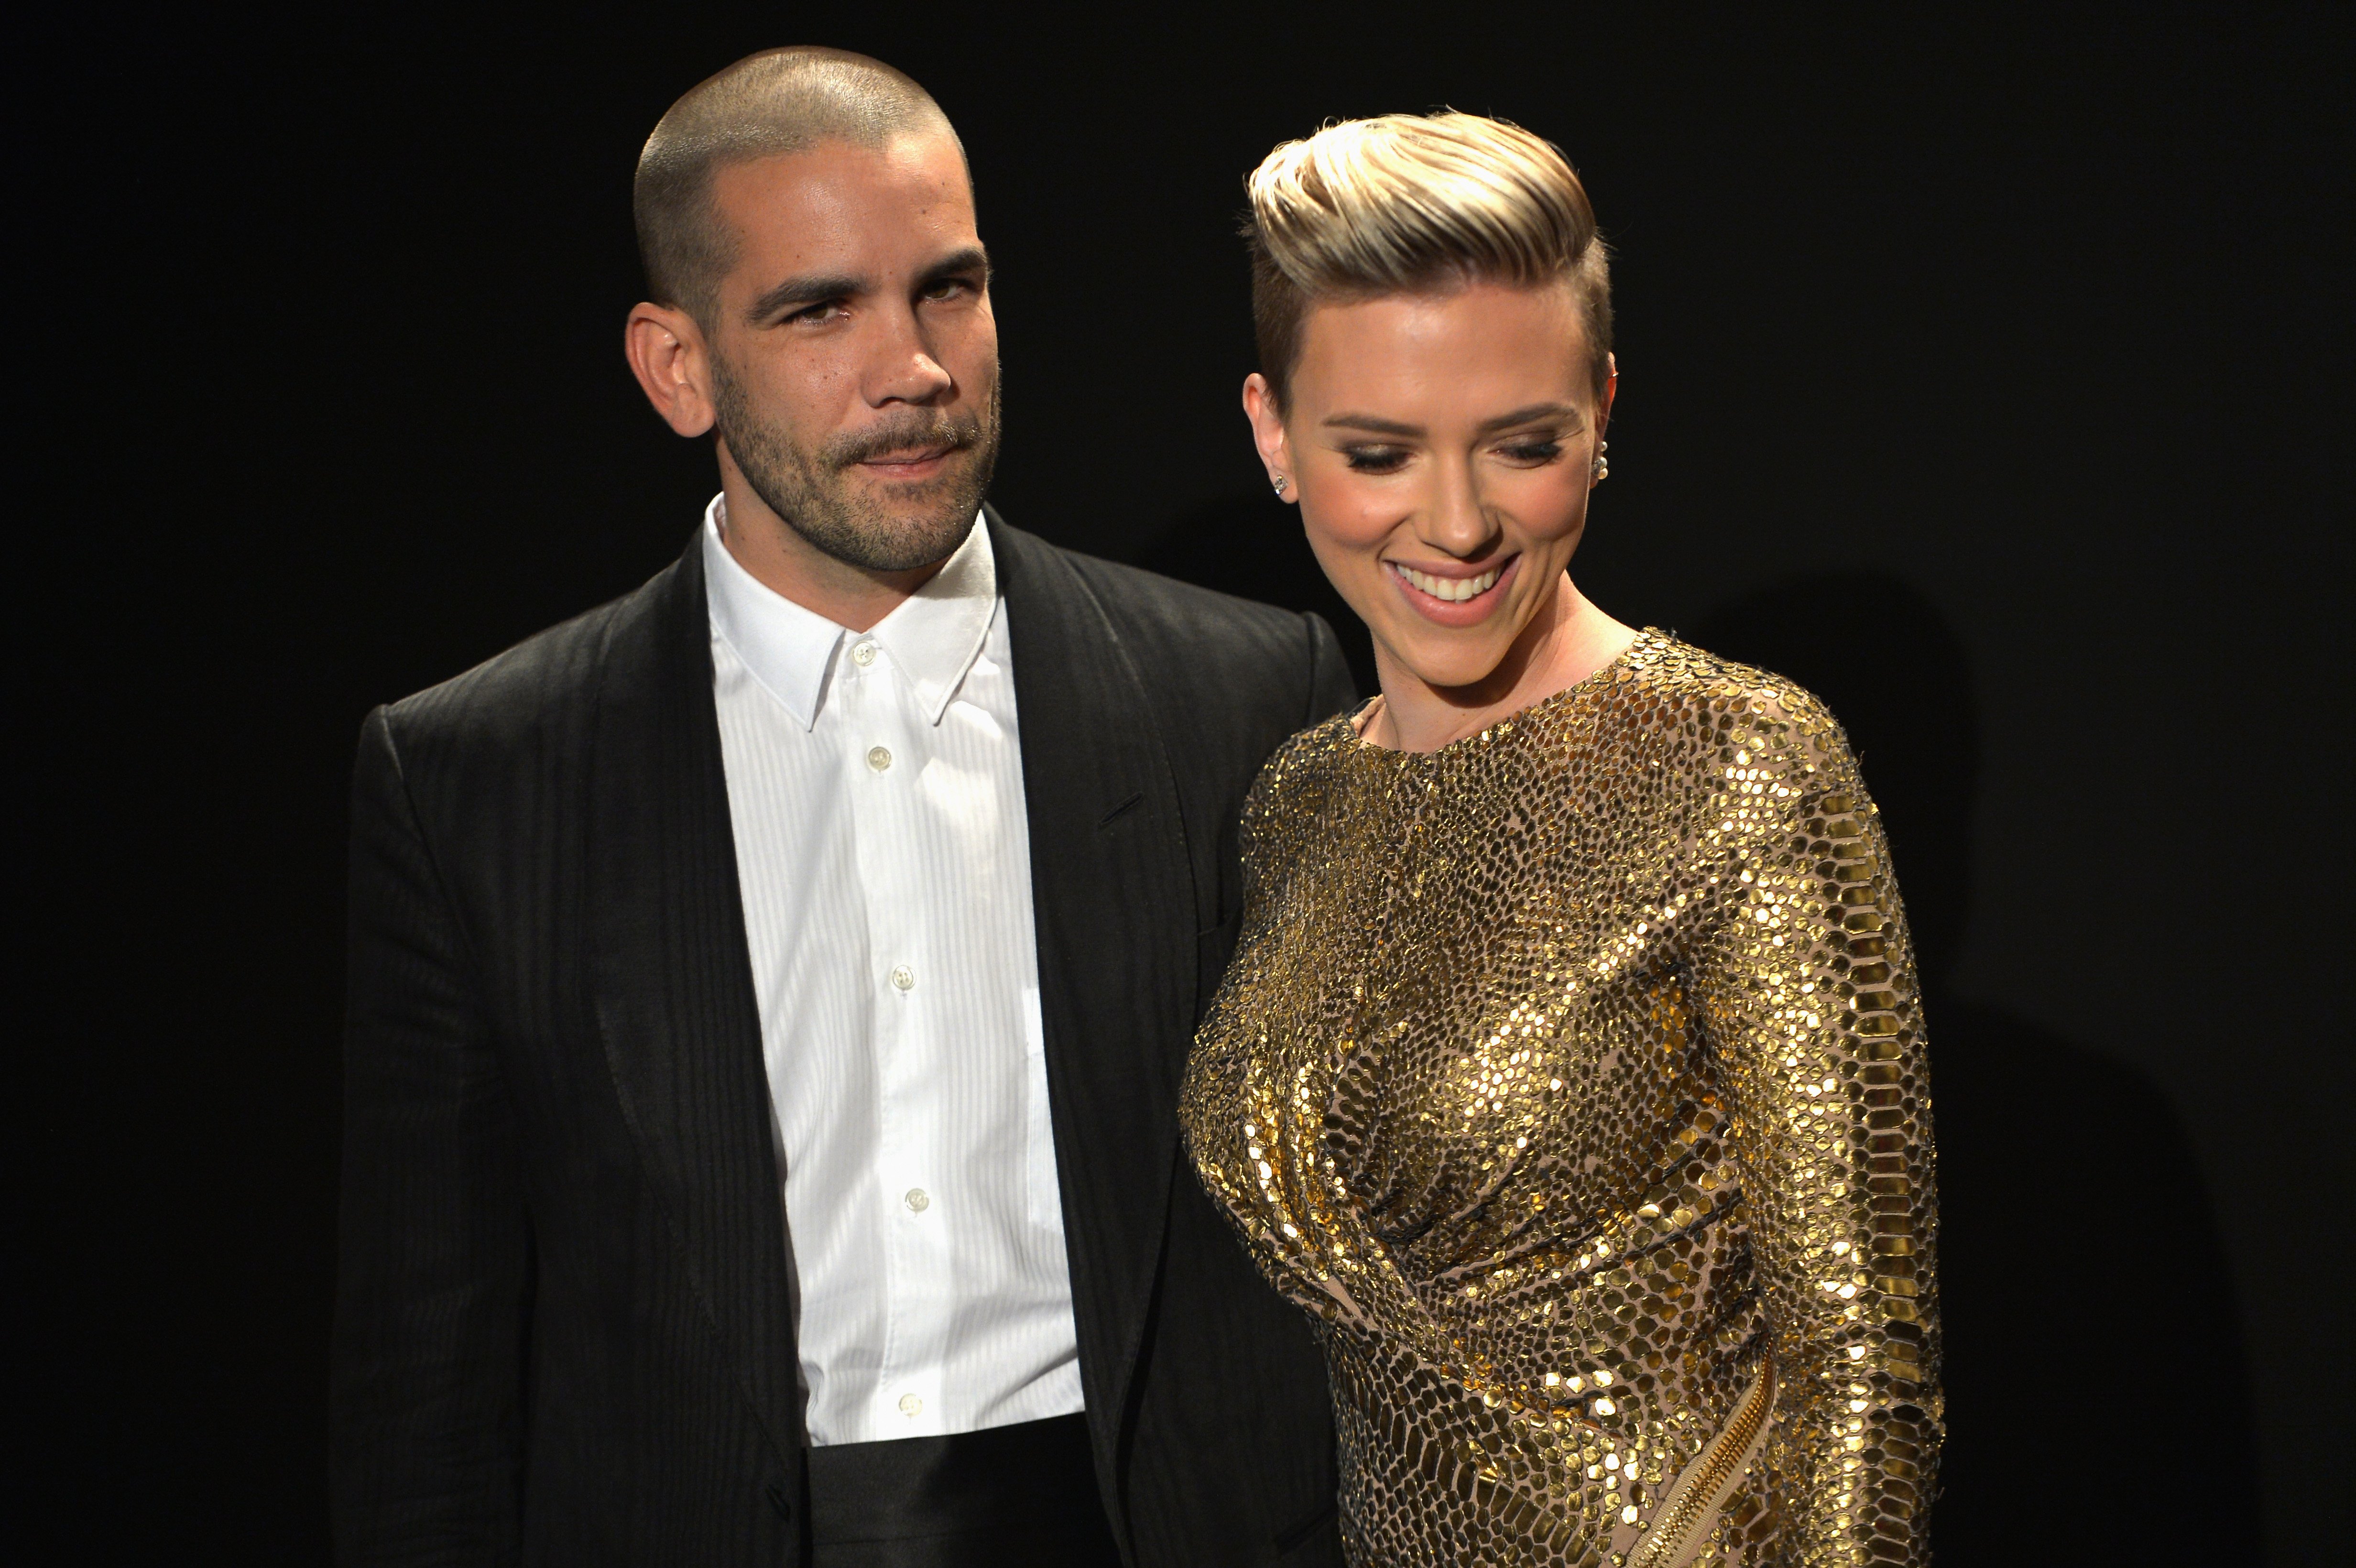 Journalist Romain Dauriac (L) and actress Scarlett Johansson, both wearing TOM FORD, attend the TOM FORD Autumn/Winter 2015 Womenswear Collection Presentation at Milk Studios in Los Angeles on February 20, 2015. Source | Getty Images 